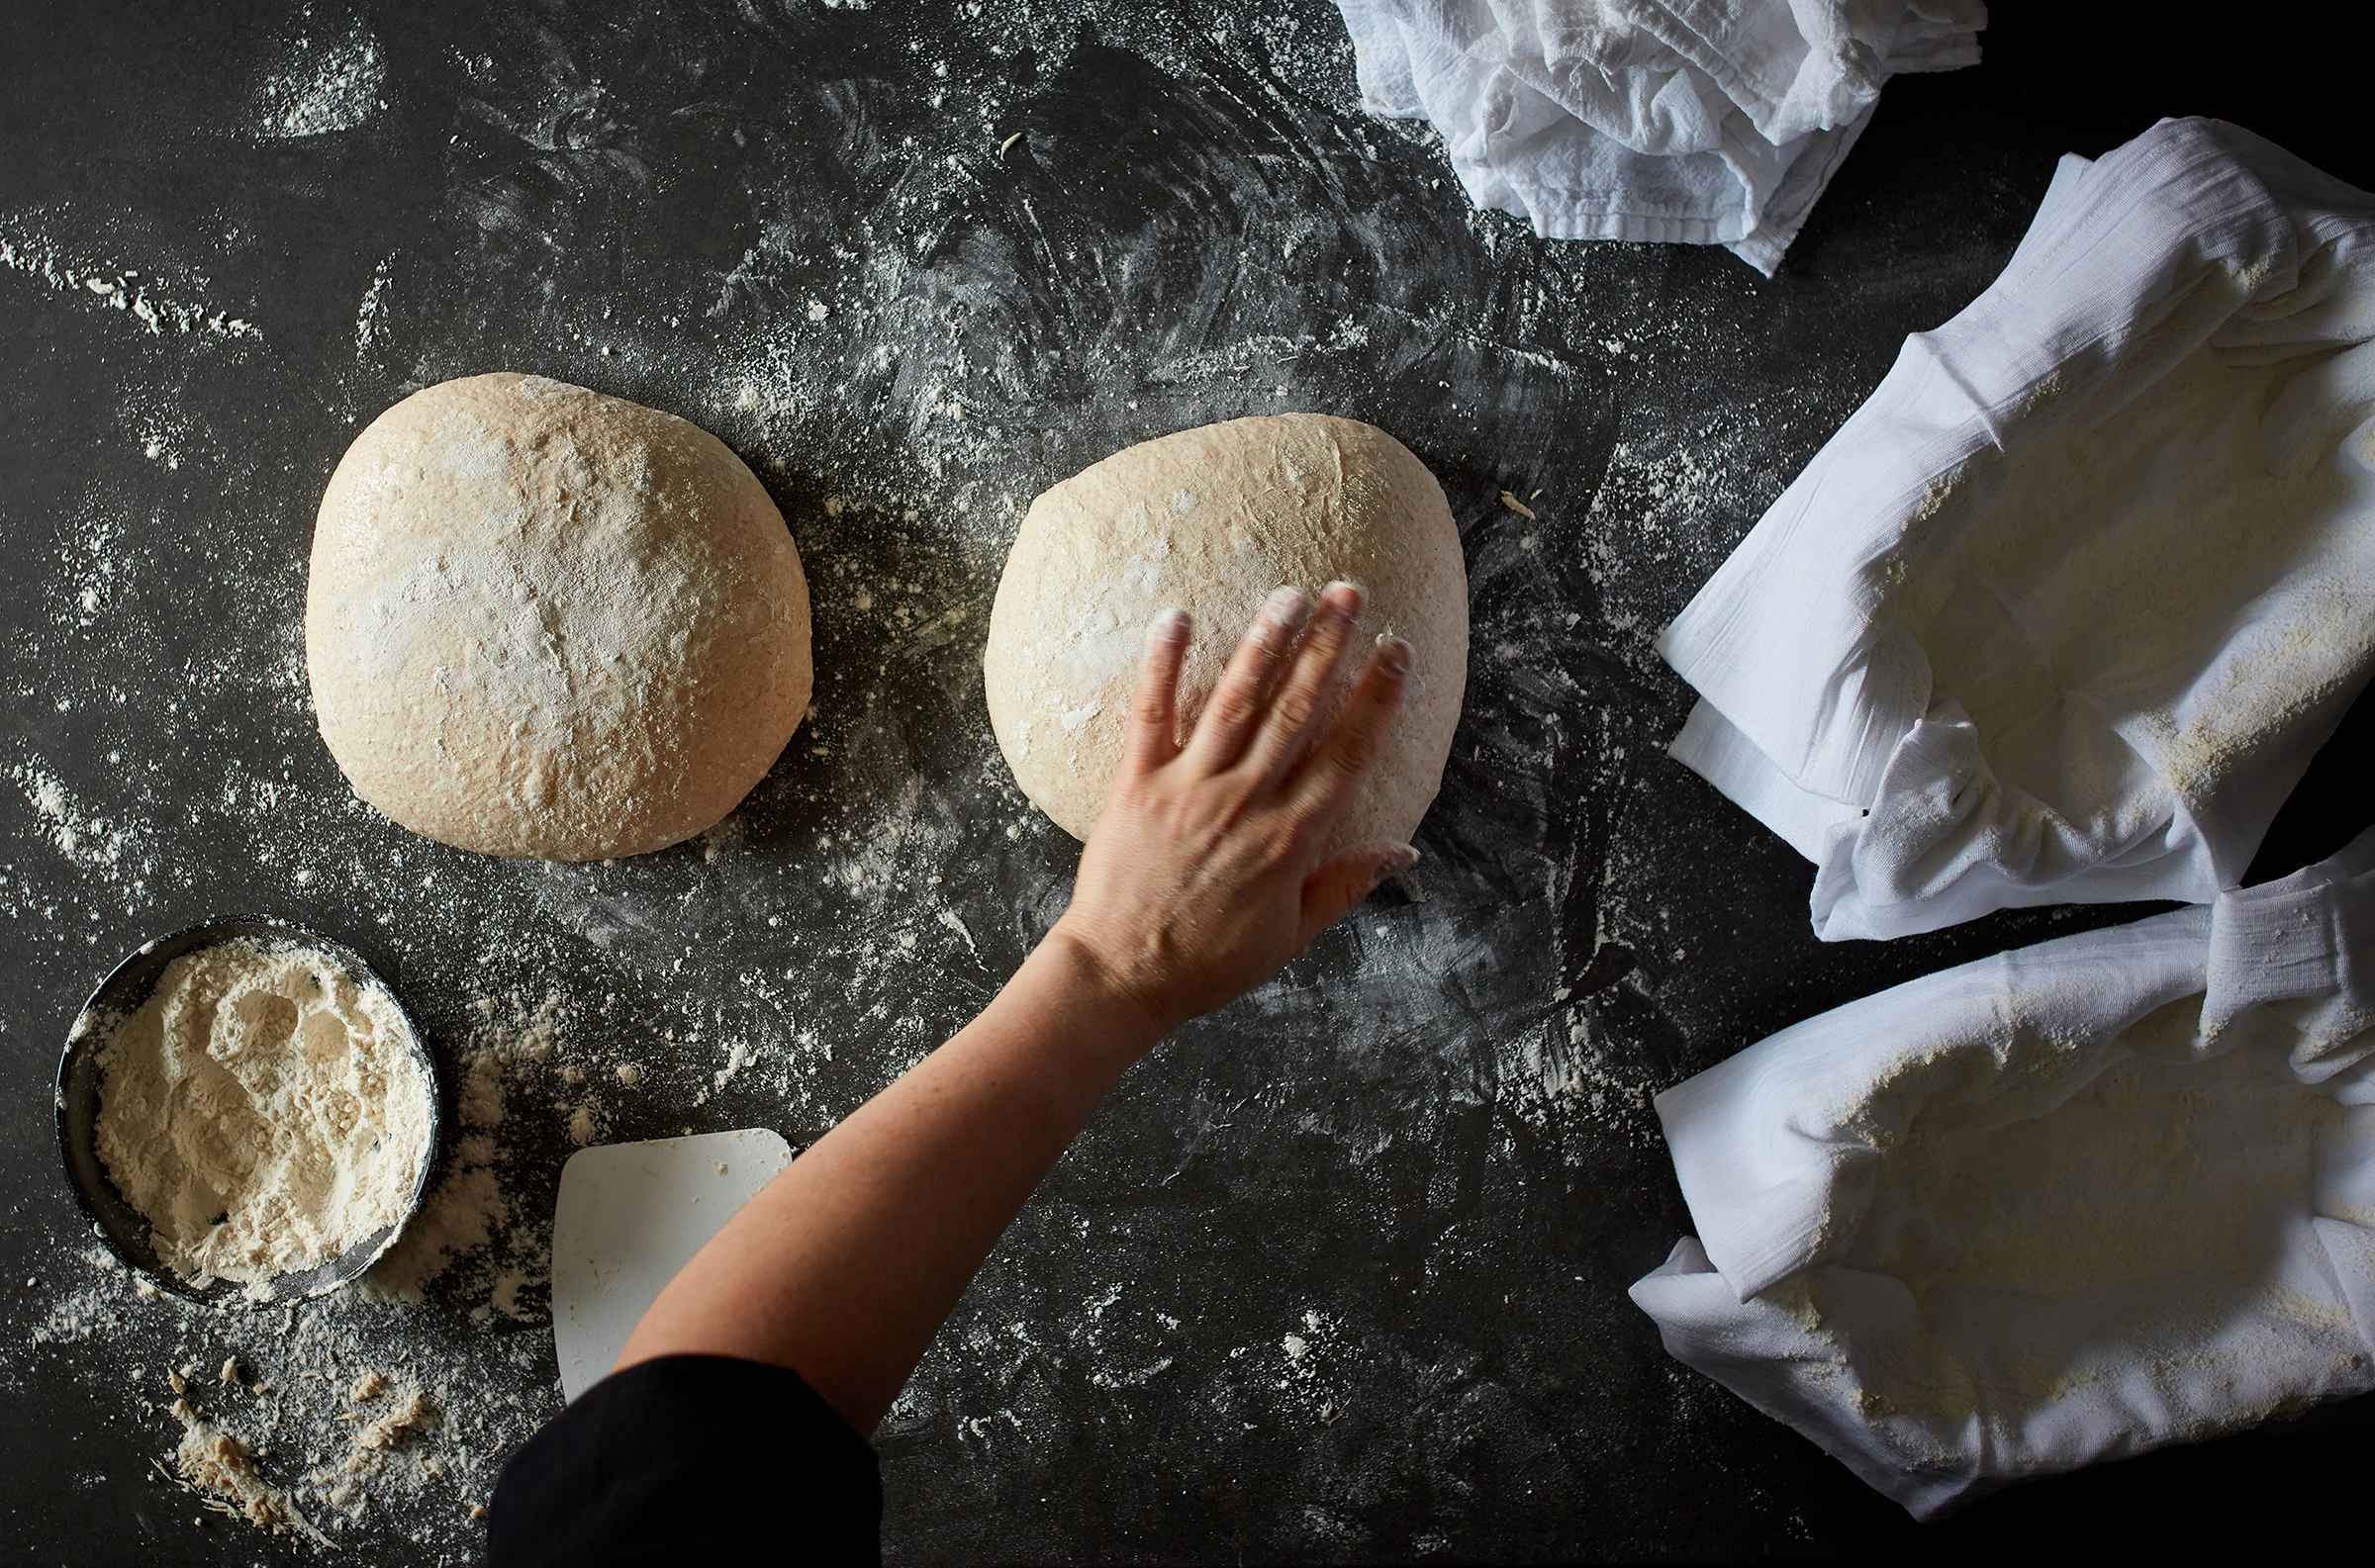 Dough is shaped for sourdough bread in New York, Sept. 10, 2019. Food Stylist: Laurie Pellicano. (Johnny Miller/The New York Times